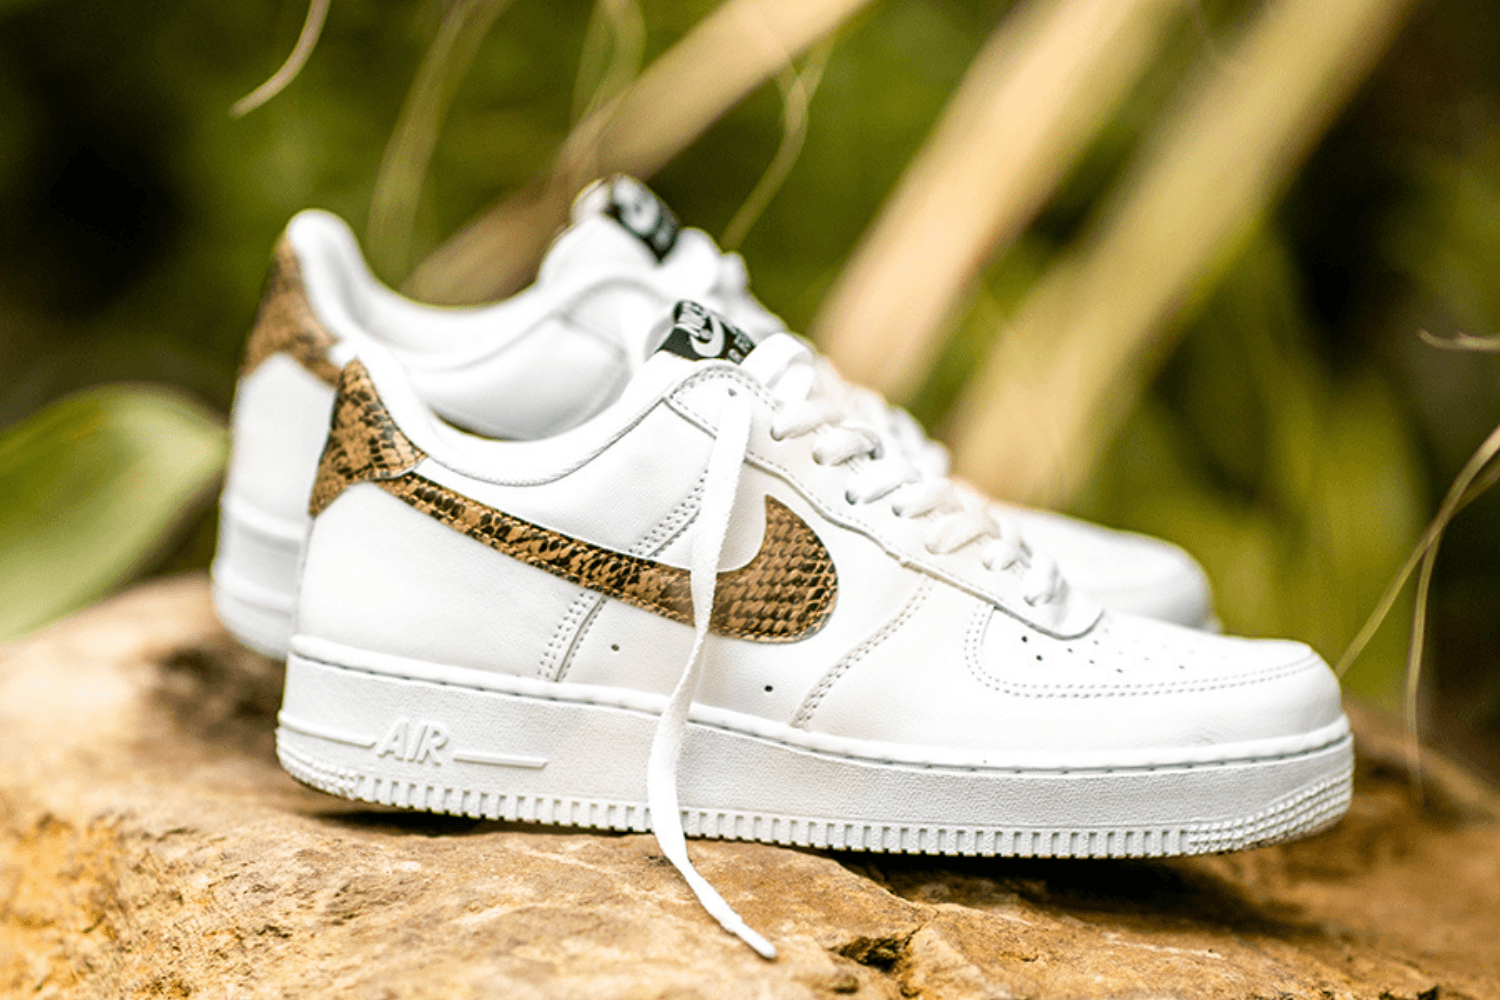 The Nike Air Force 1 Low PRM QS 'Ivory Snake' makes a comeback